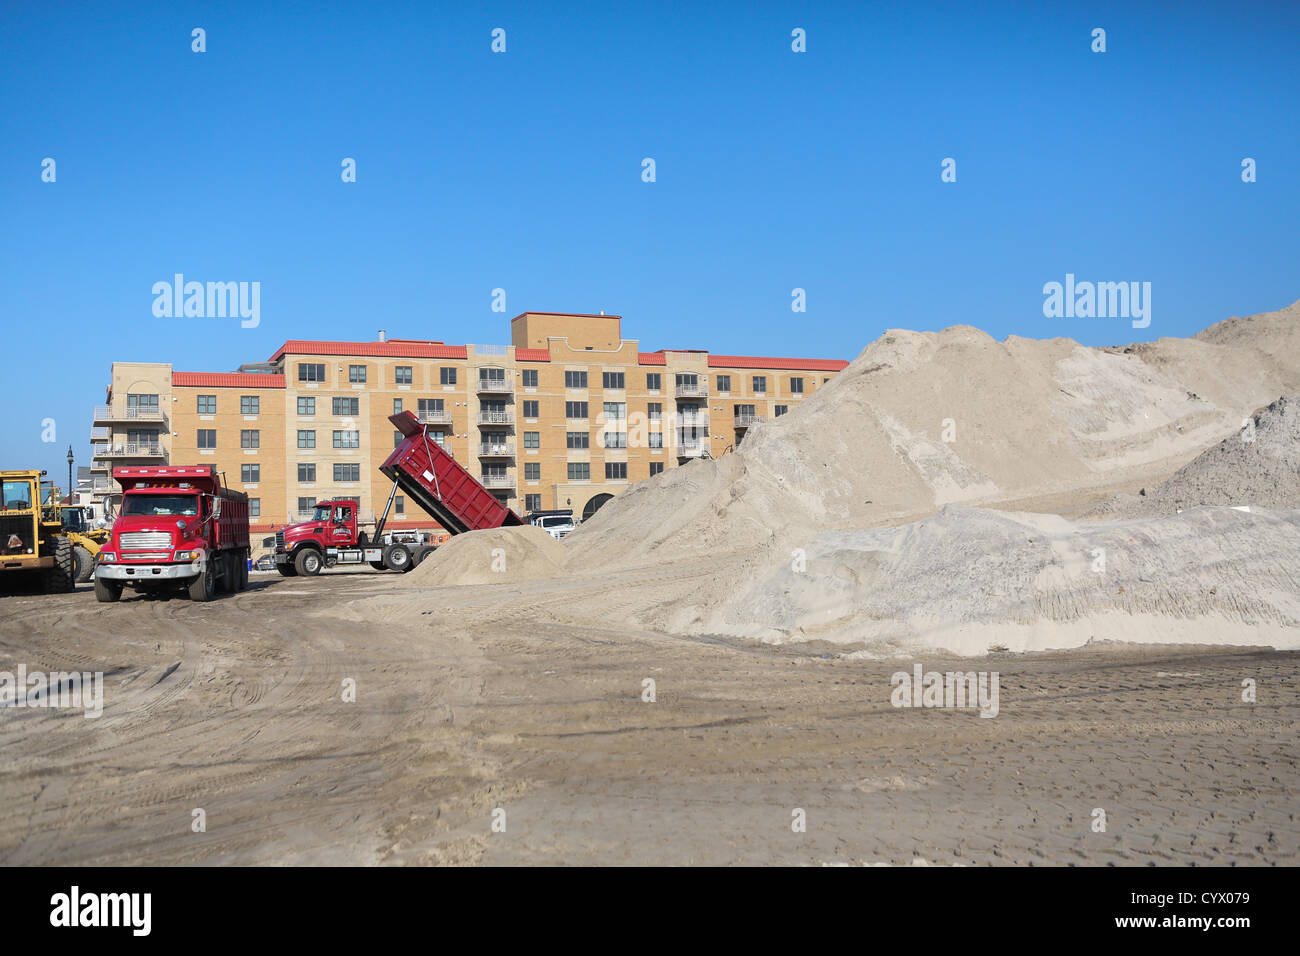 Nov. 11, 2012 - Long Beach, New York - A multiple story mountain of sand gathered from the clean up of Long Beach, New York after Hurricane Sandy is seen on Sunday, November 11, 2012. (Credit Image: © Nicolaus Czarnecki/ZUMAPRESS.com) Stock Photo